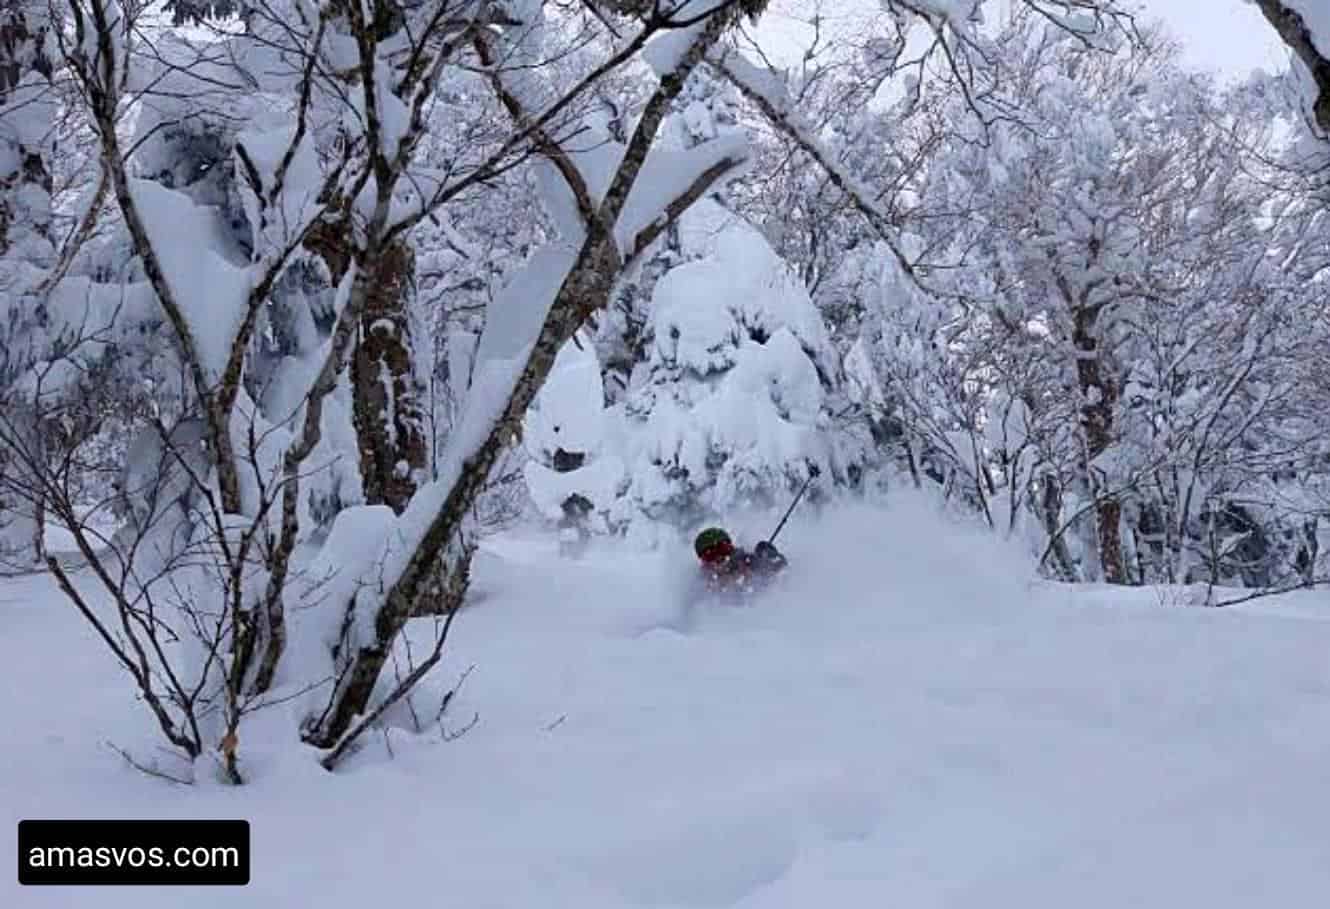 A Man Skiing On Snow In Japan